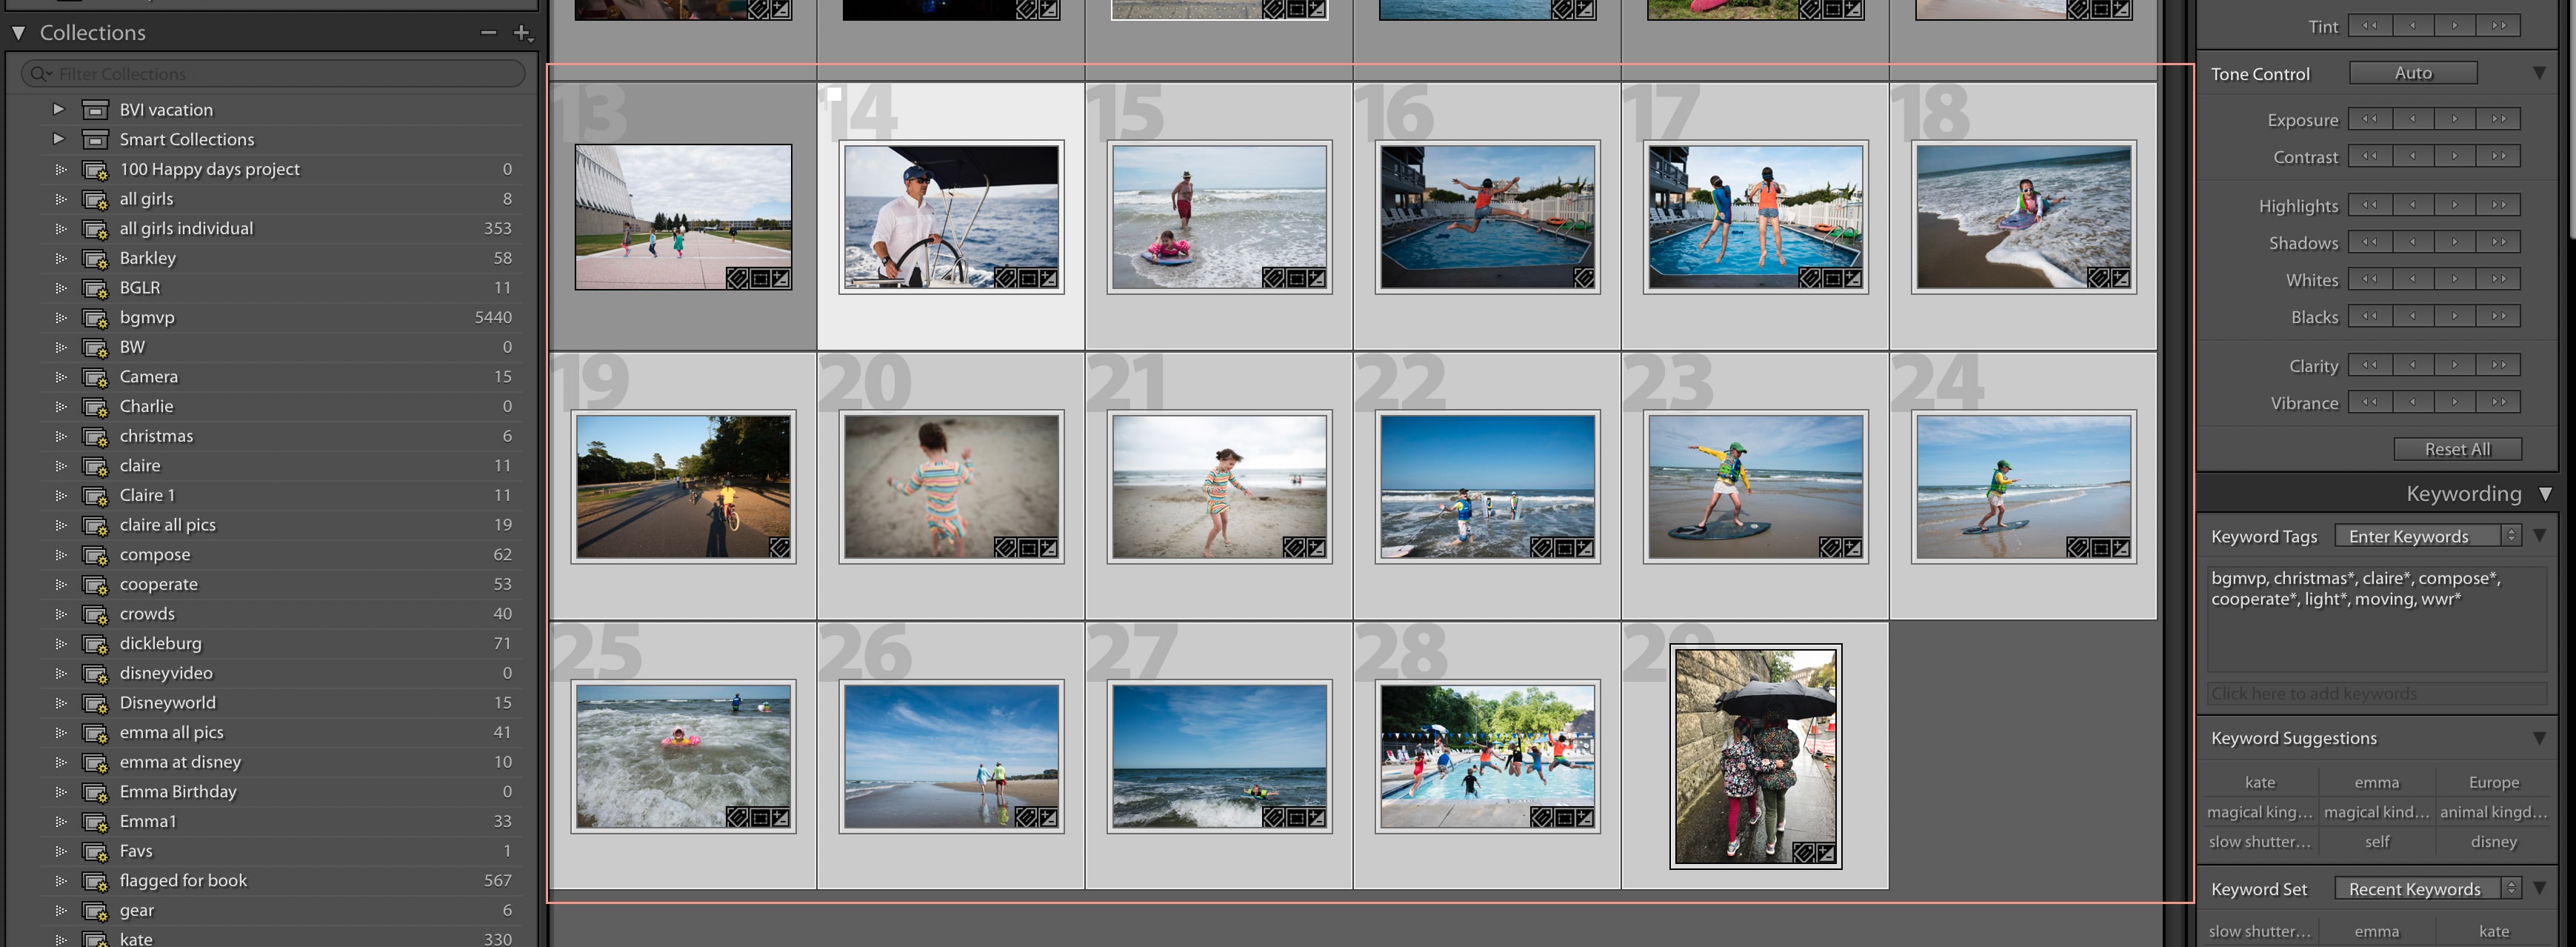 Lightroom Export Settings Every Photographer Should Know